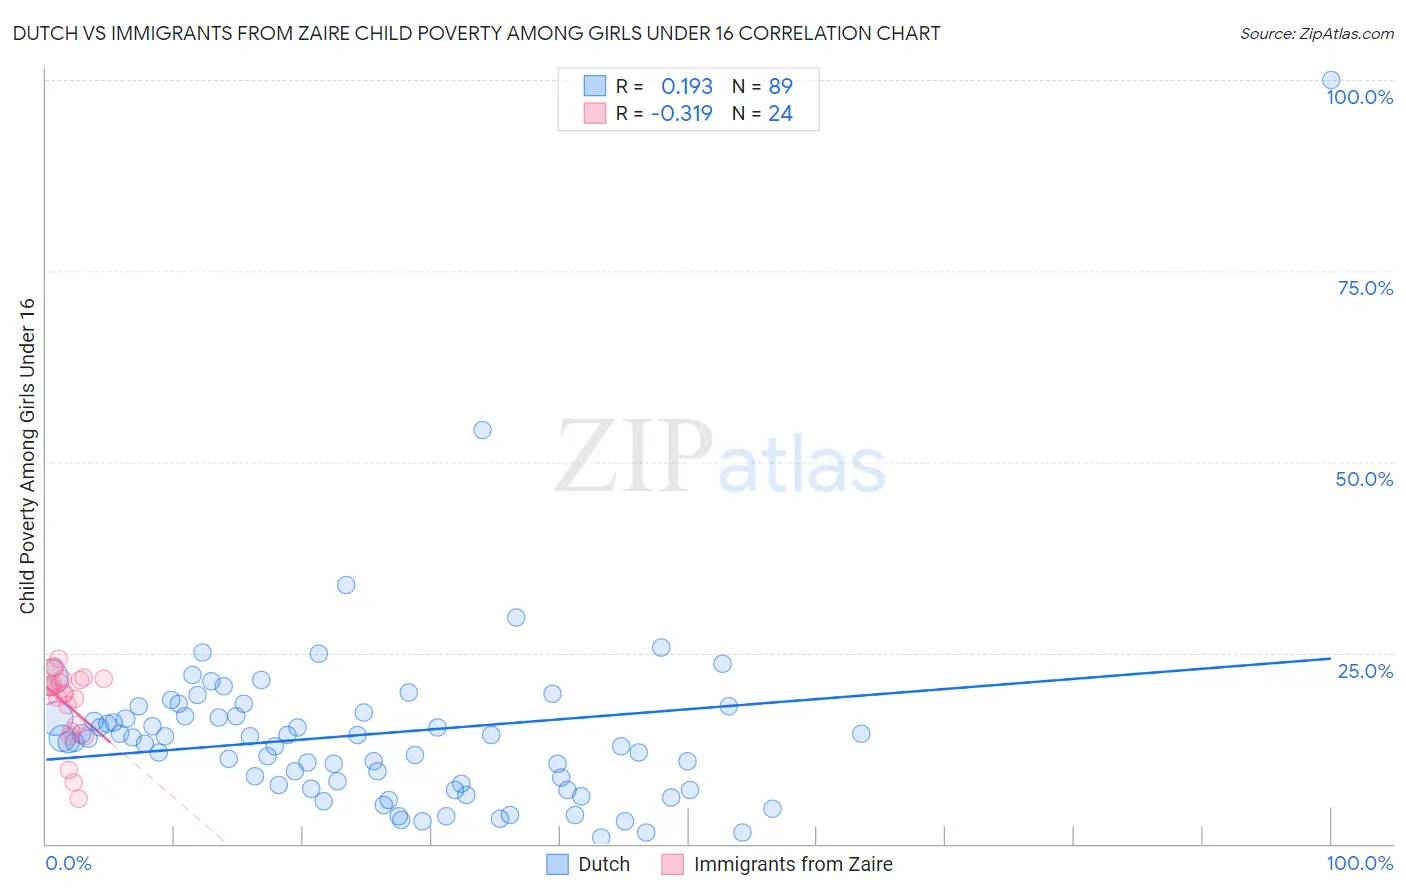 Dutch vs Immigrants from Zaire Child Poverty Among Girls Under 16